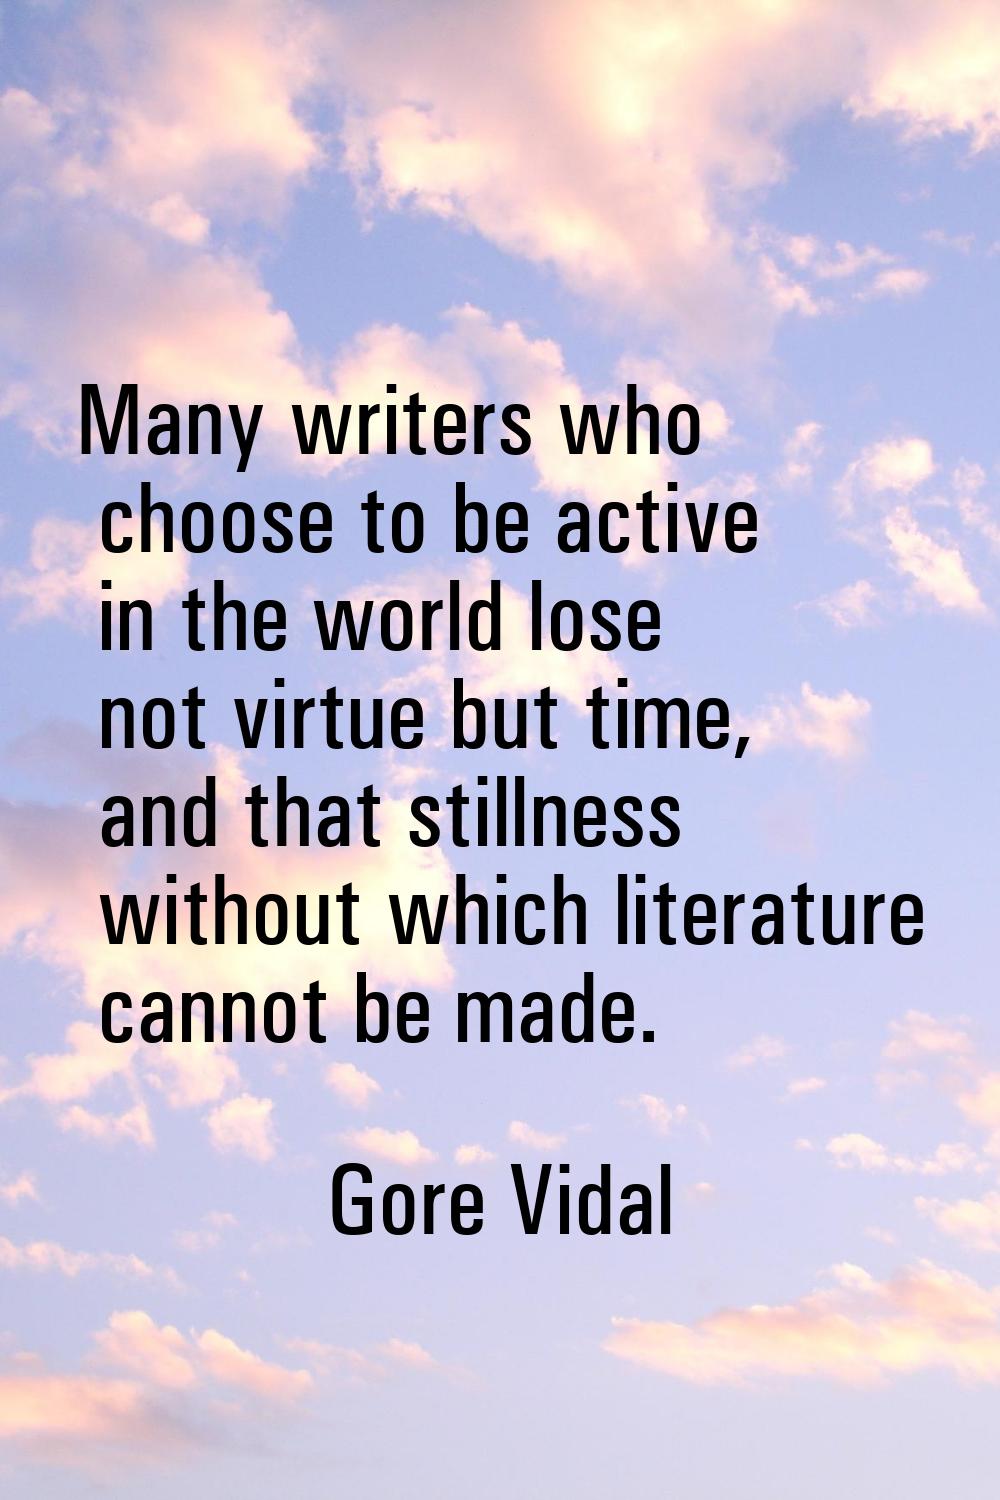 Many writers who choose to be active in the world lose not virtue but time, and that stillness with